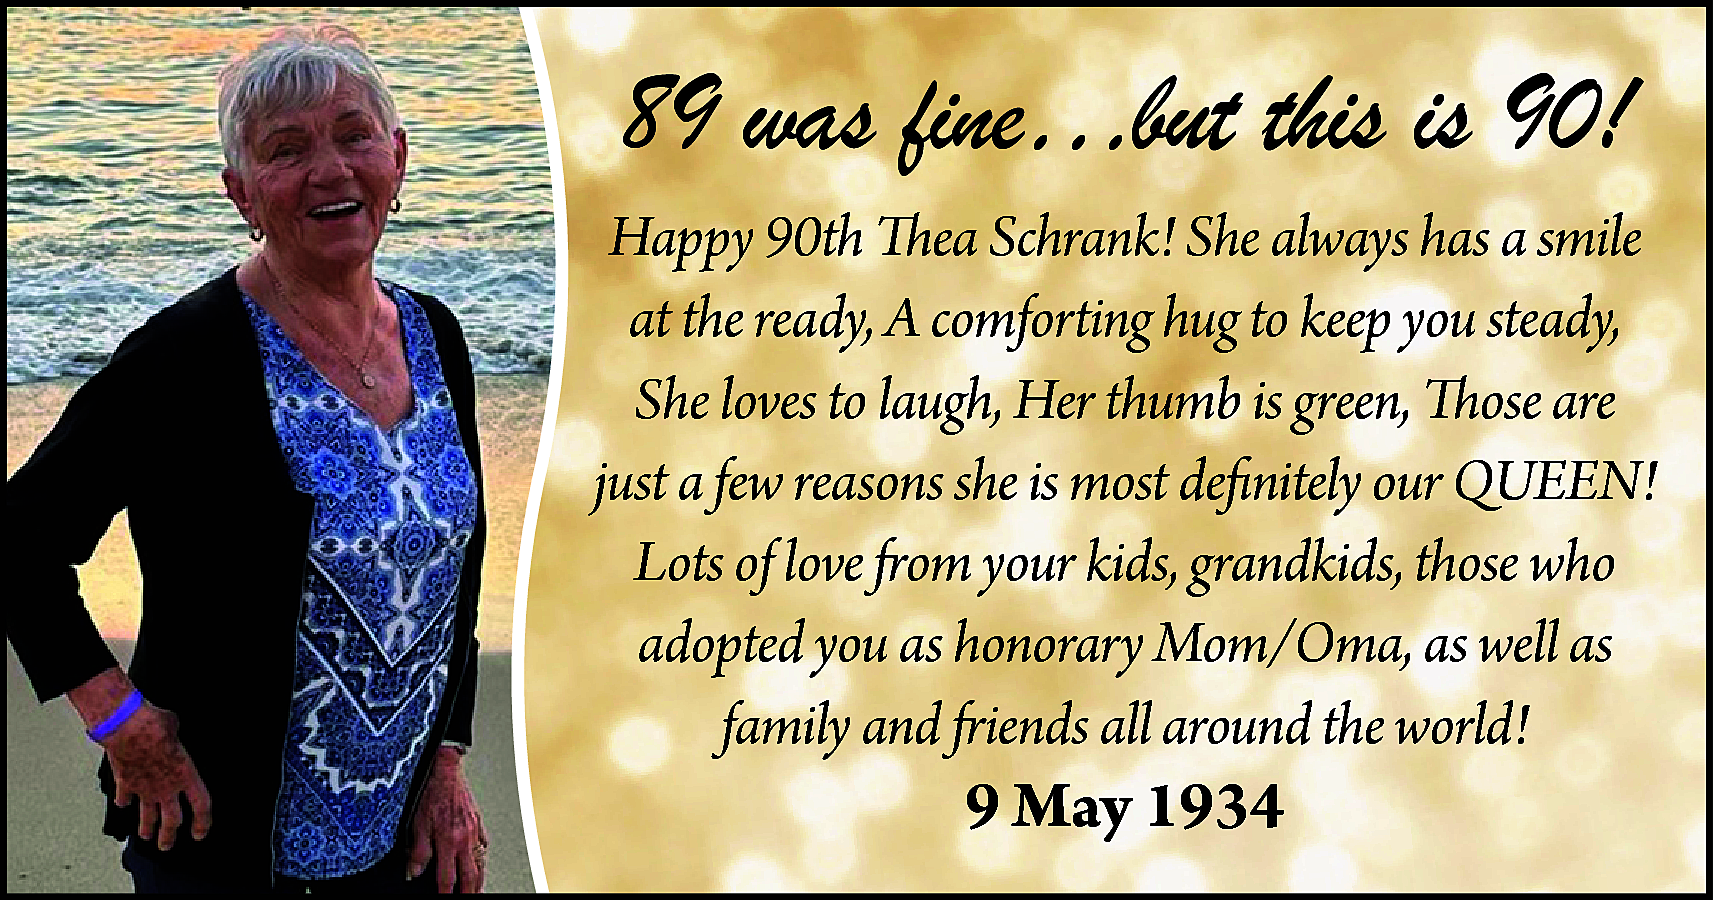 89 was fine…but this is  89 was fine…but this is 90!  Happy 90th Thea Schrank! She always has a smile  at the ready, A comforting hug to keep you steady,  She loves to laugh, Her thumb is green, Those are  just a few reasons she is most definitely our QUEEN!  Lots of love from your kids, grandkids, those who  adopted you as honorary Mom/Oma, as well as  family and friends all around the world!    9 May 1934    